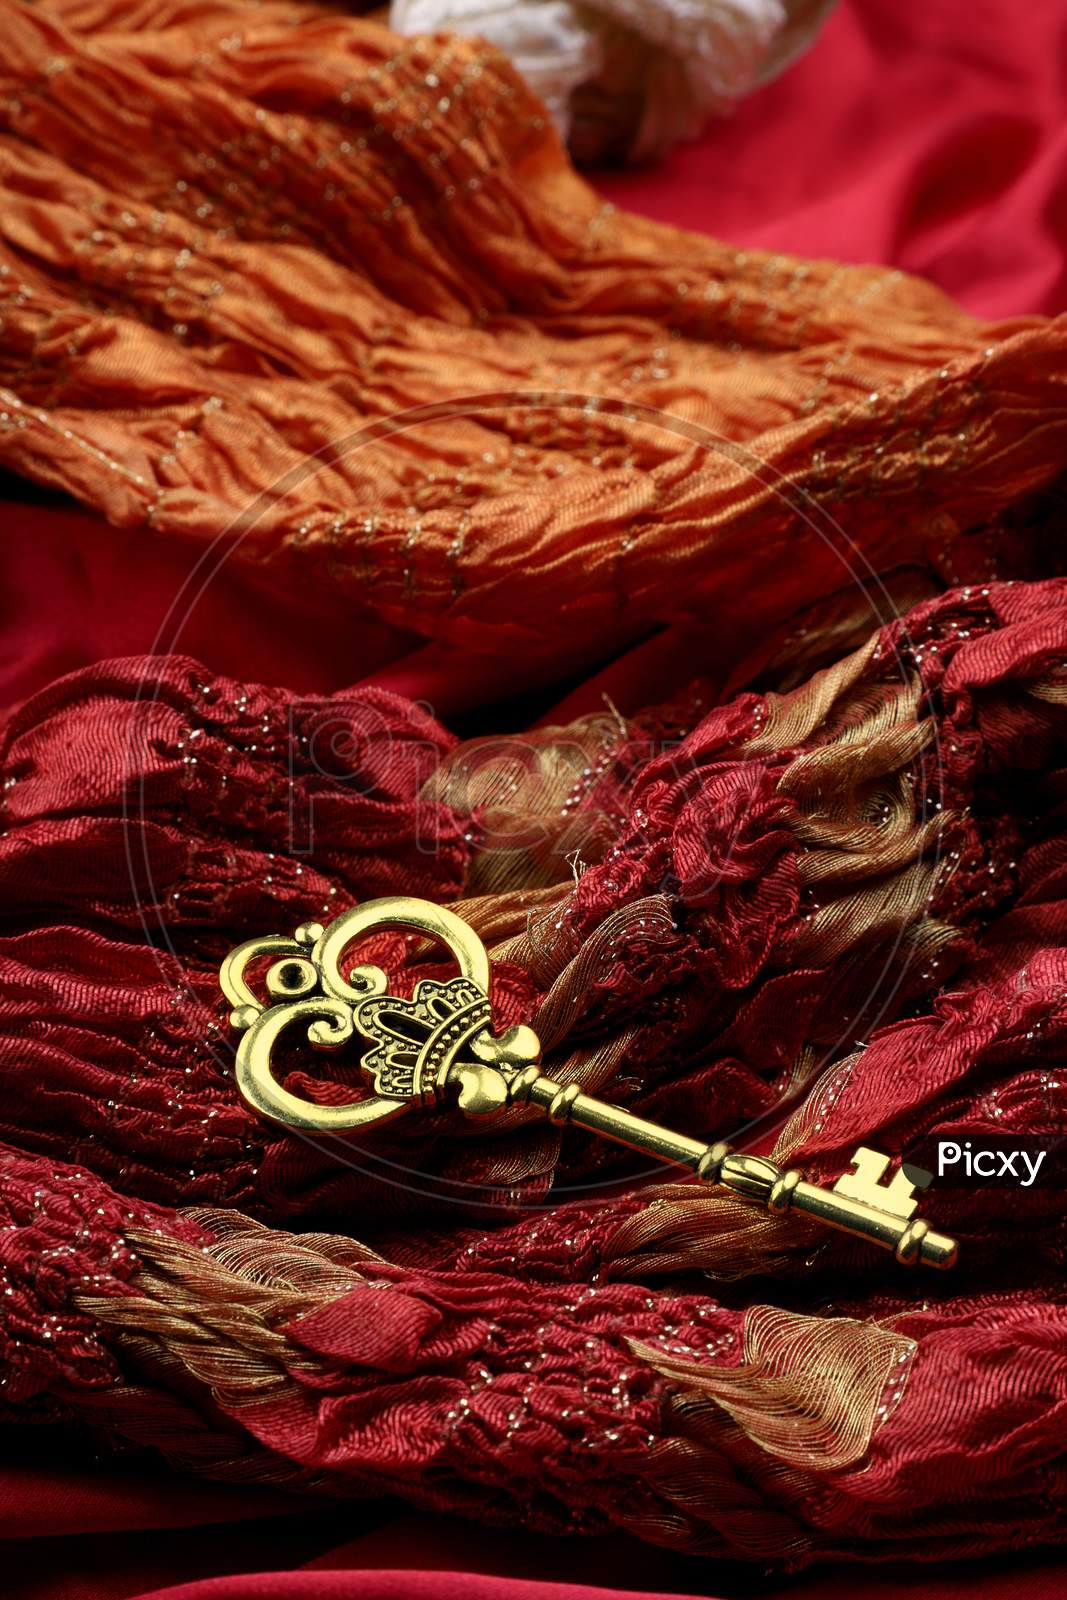 Antique Golden Key On Red Fabric